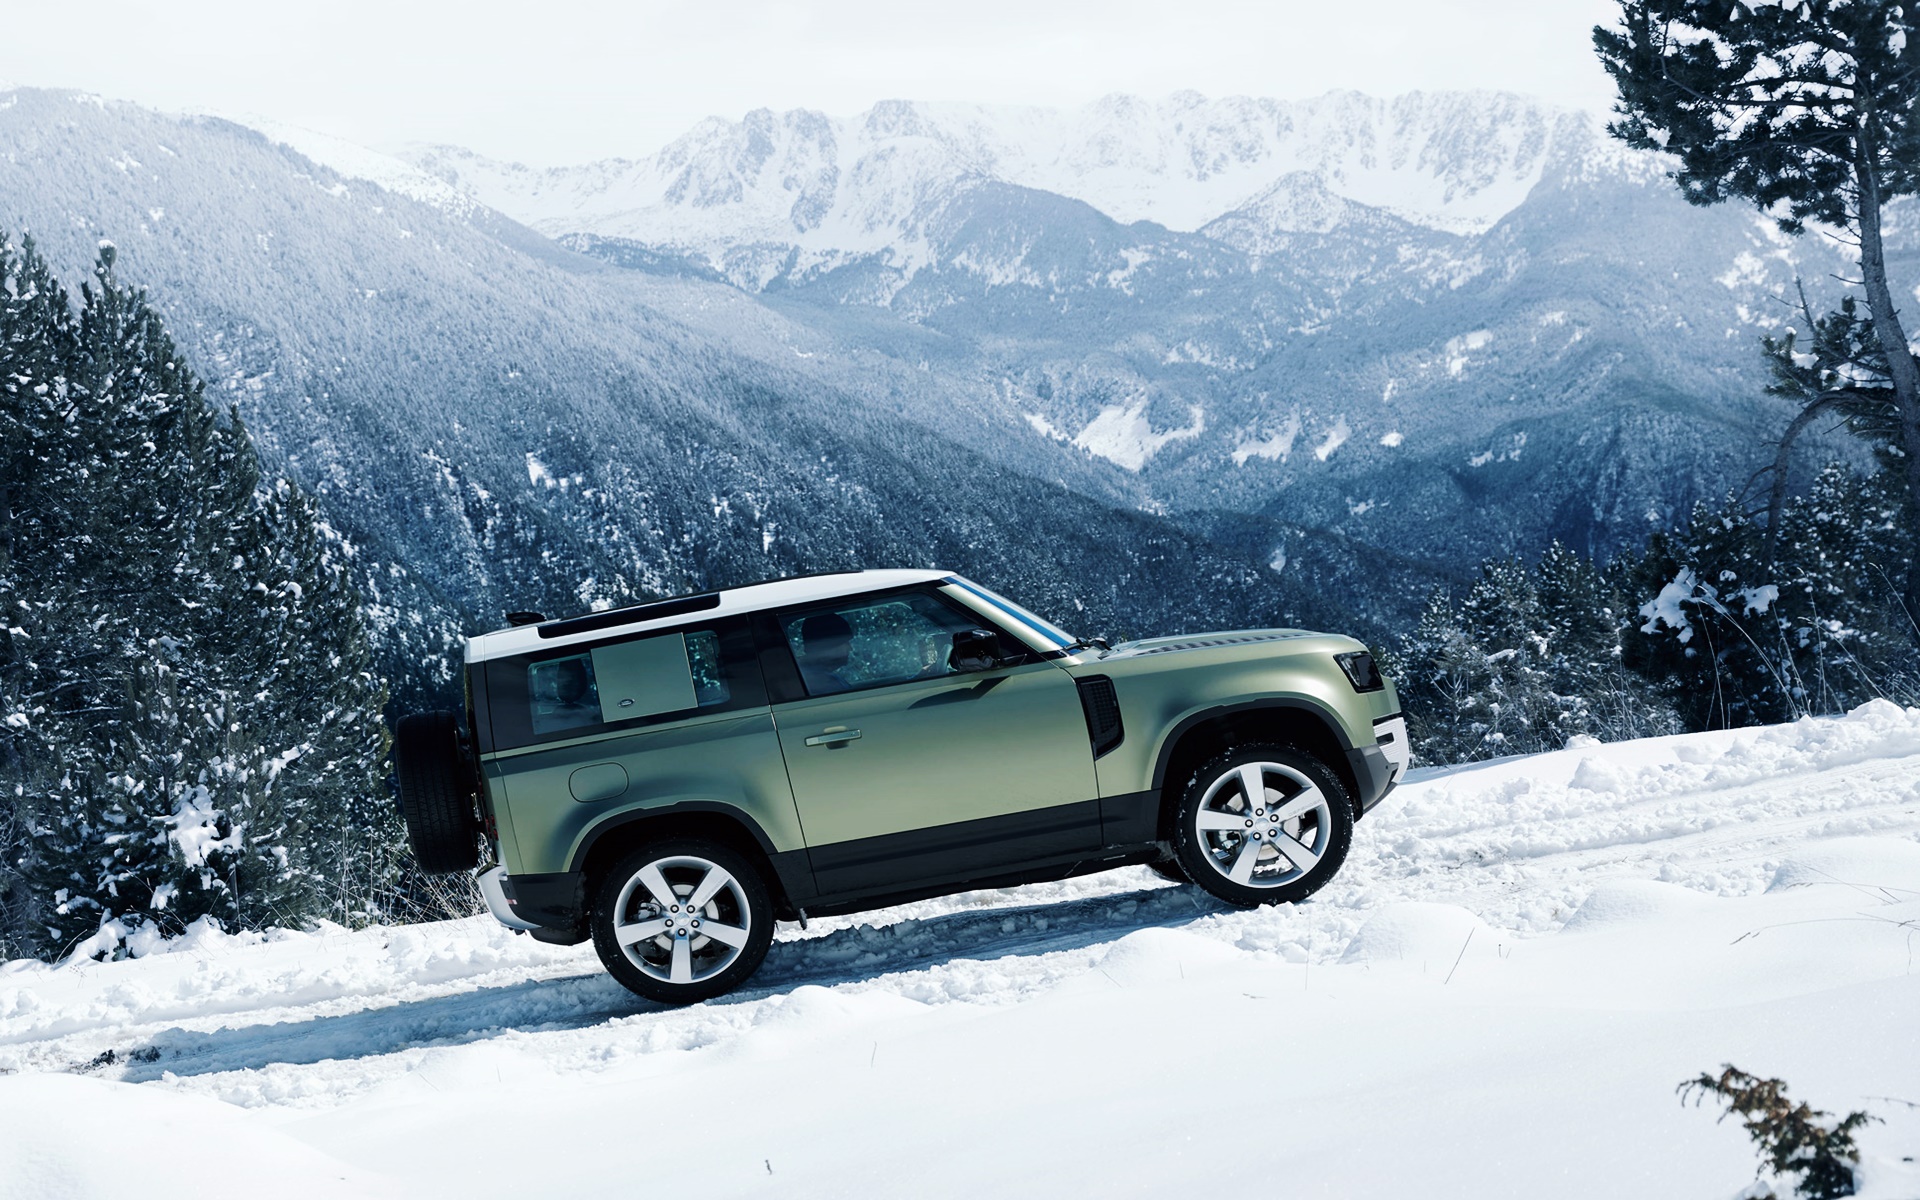 General 1920x1200 Land Rover Defender Land Rover snow mountains SUV British cars car winter nature